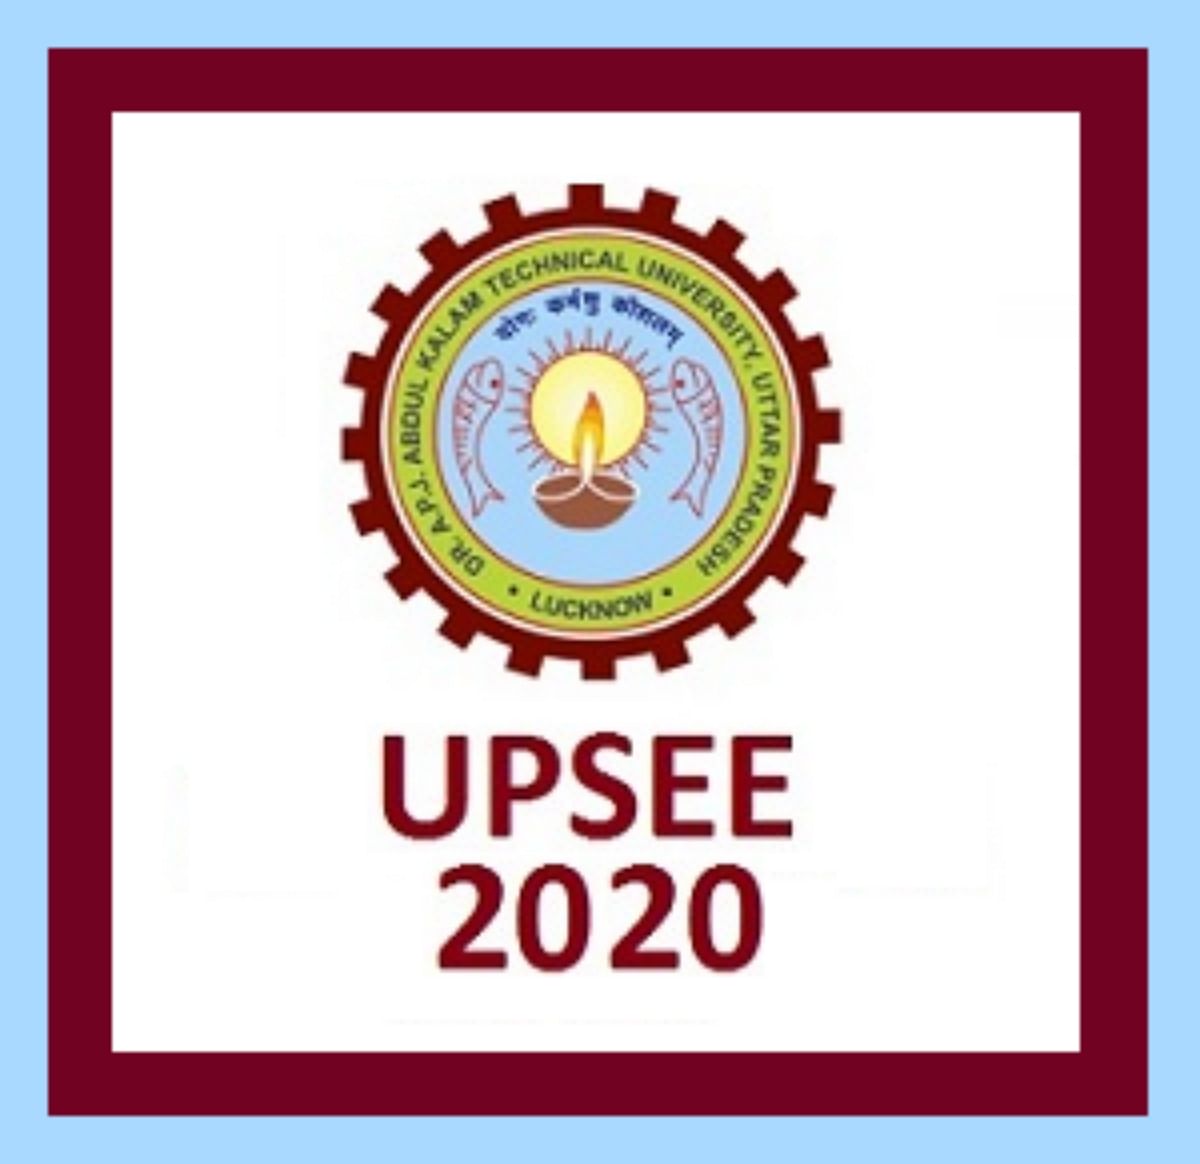 UPSEE 2020 Round 1 Seat Allotment Result Declared, Check Here